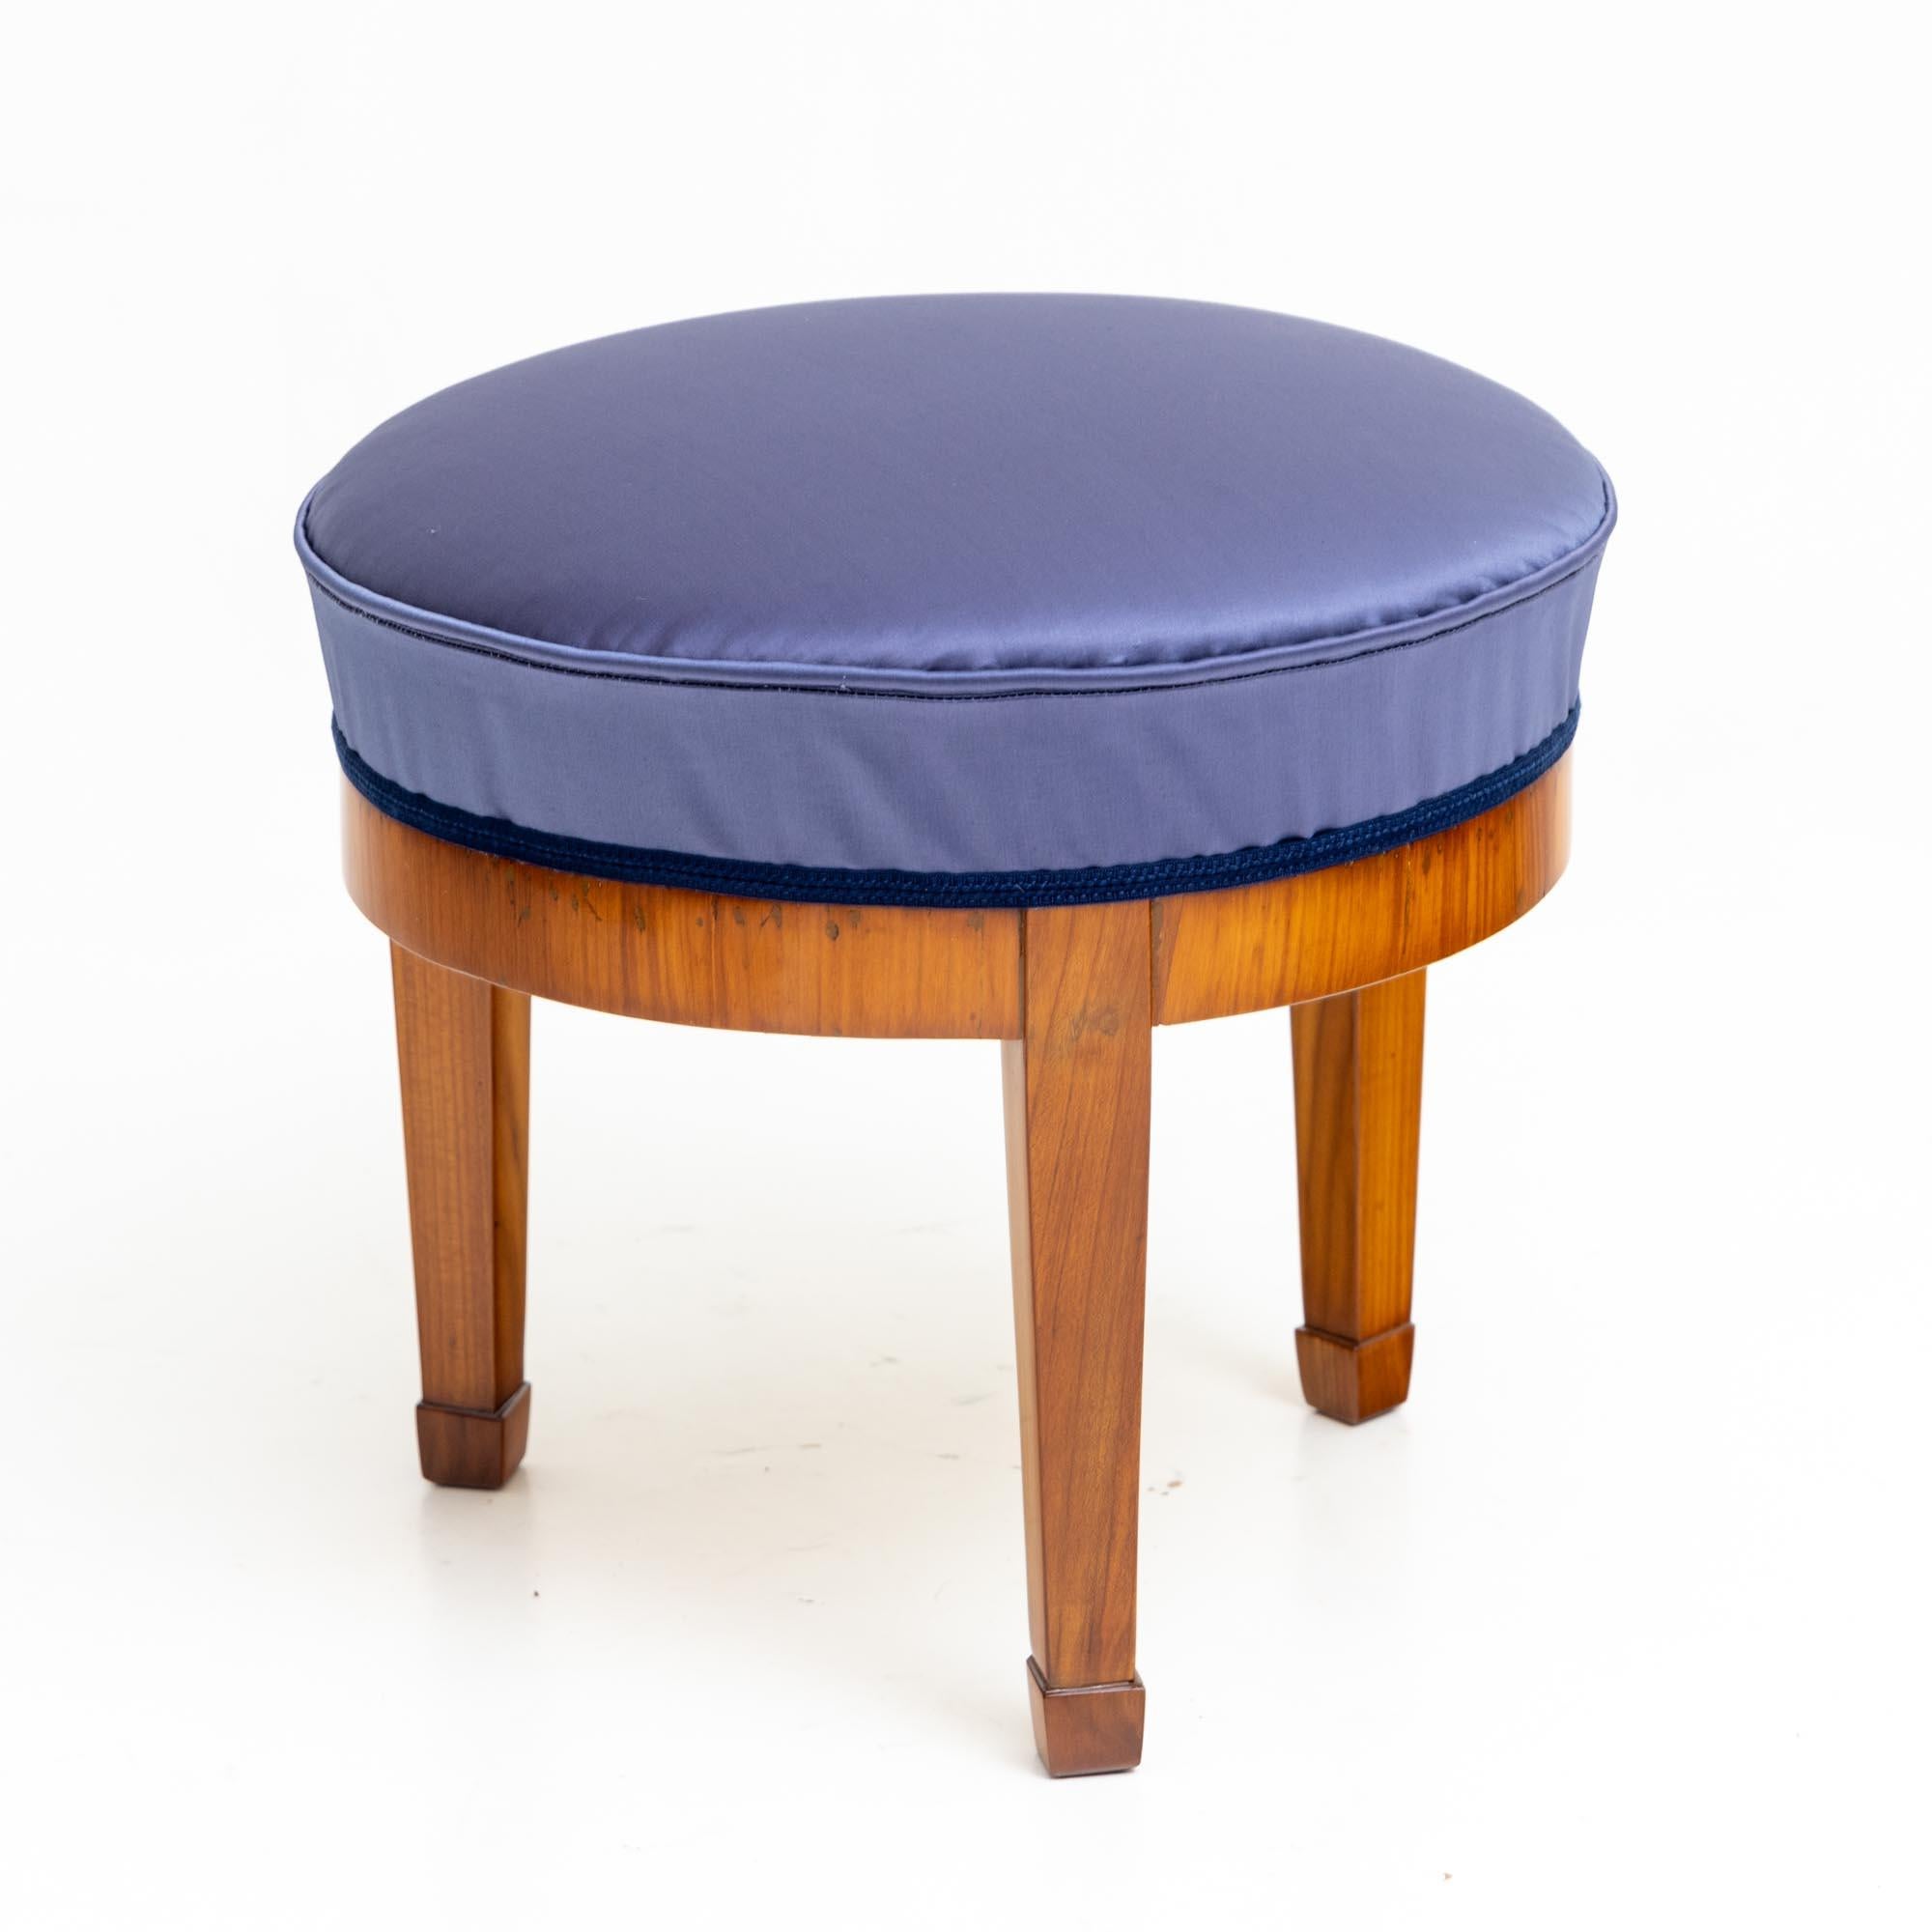 Small Biedermeier stool with three socketed and pointed legs and straight frame. The frame is veneered in cherry and polished by hand. The stool has been newly upholstered with a blue satin fabric.